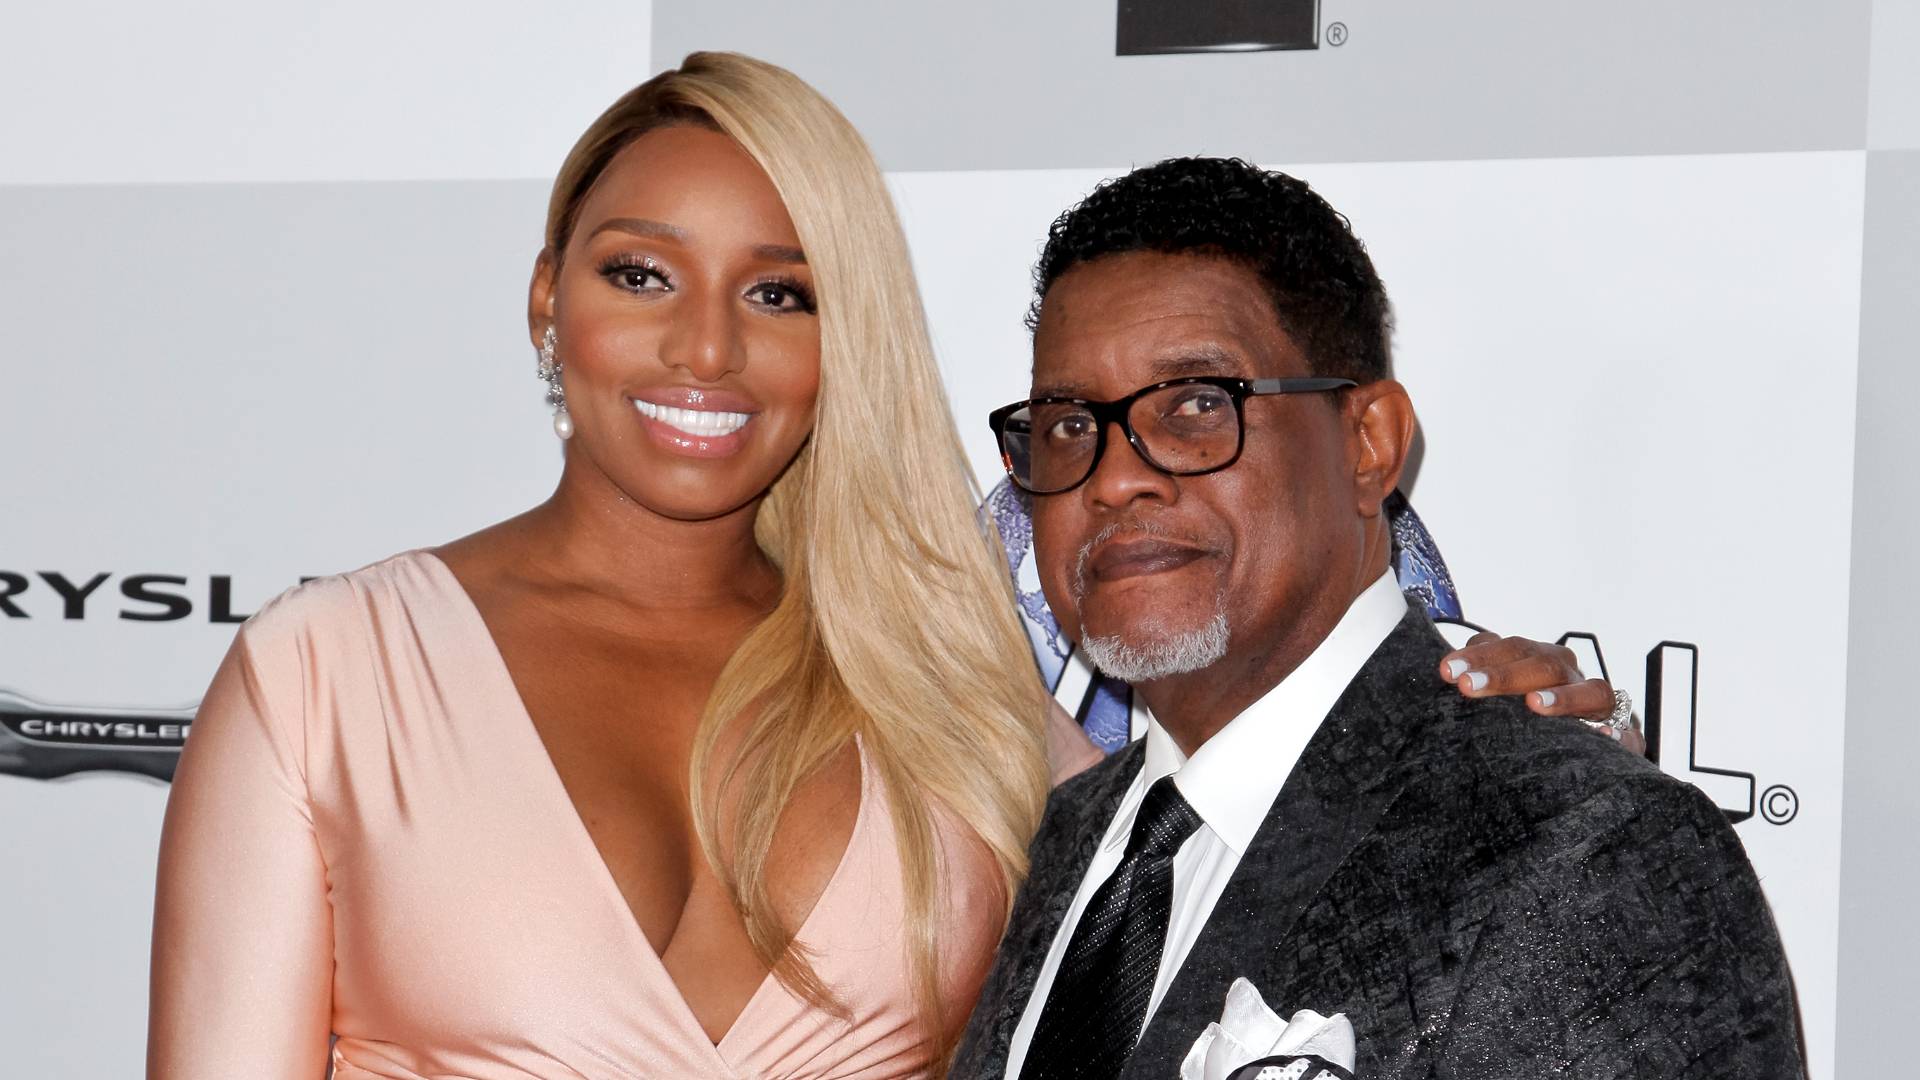 NeNe Leakes and Gregg Leakes attend NBCUniversal's 73rd Annual Golden Globes After Party at The Beverly Hilton Hotel on January 10, 2016 in Beverly Hills, California.